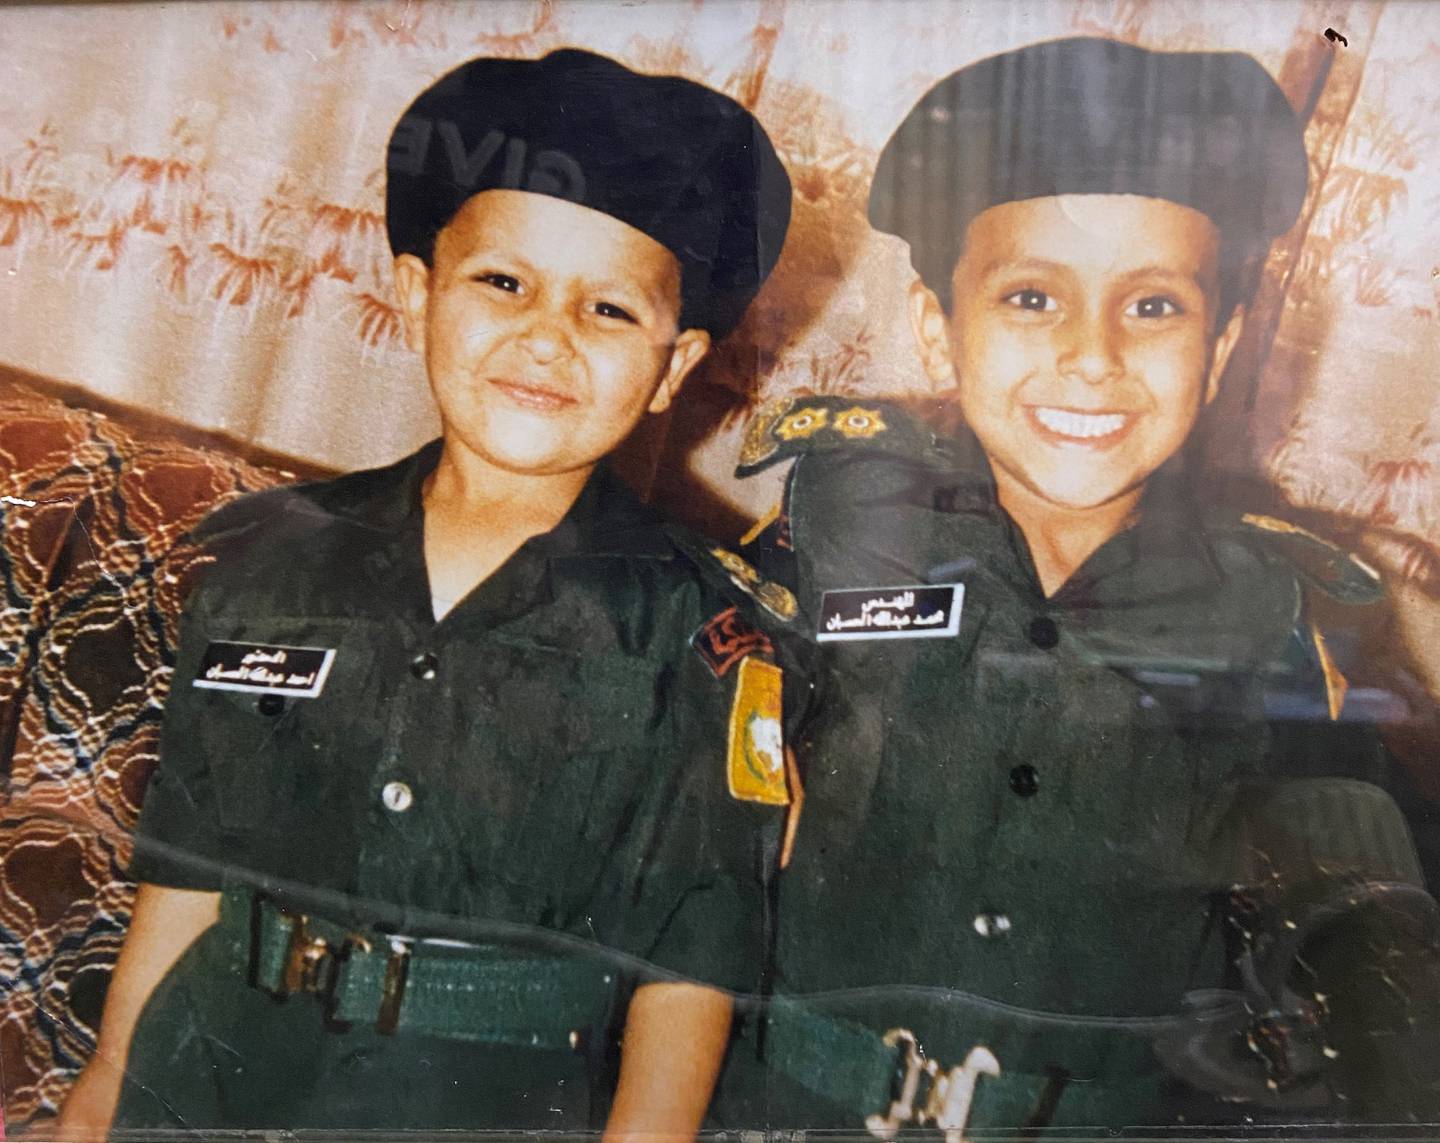 Mohammed Alhusban in Al Mafraq in 1986 with his brother, Ahmed. From an early age his parents encouraged him to be an engineer and his brother to be a doctor. Photo: Mohammed Alhusban